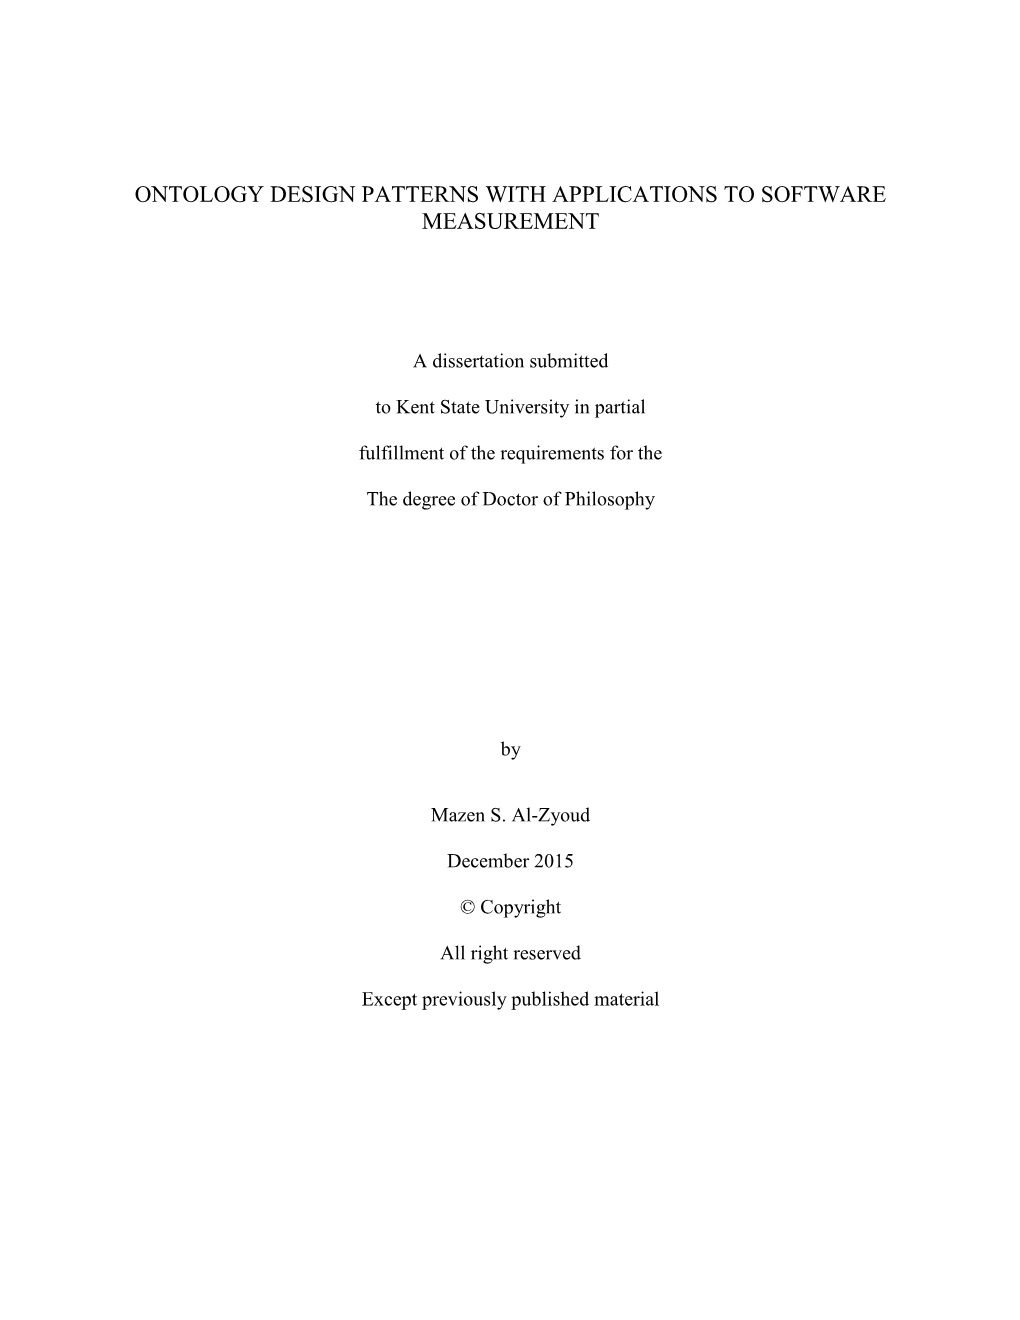 Ontology Design Patterns with Applications to Software Measurement